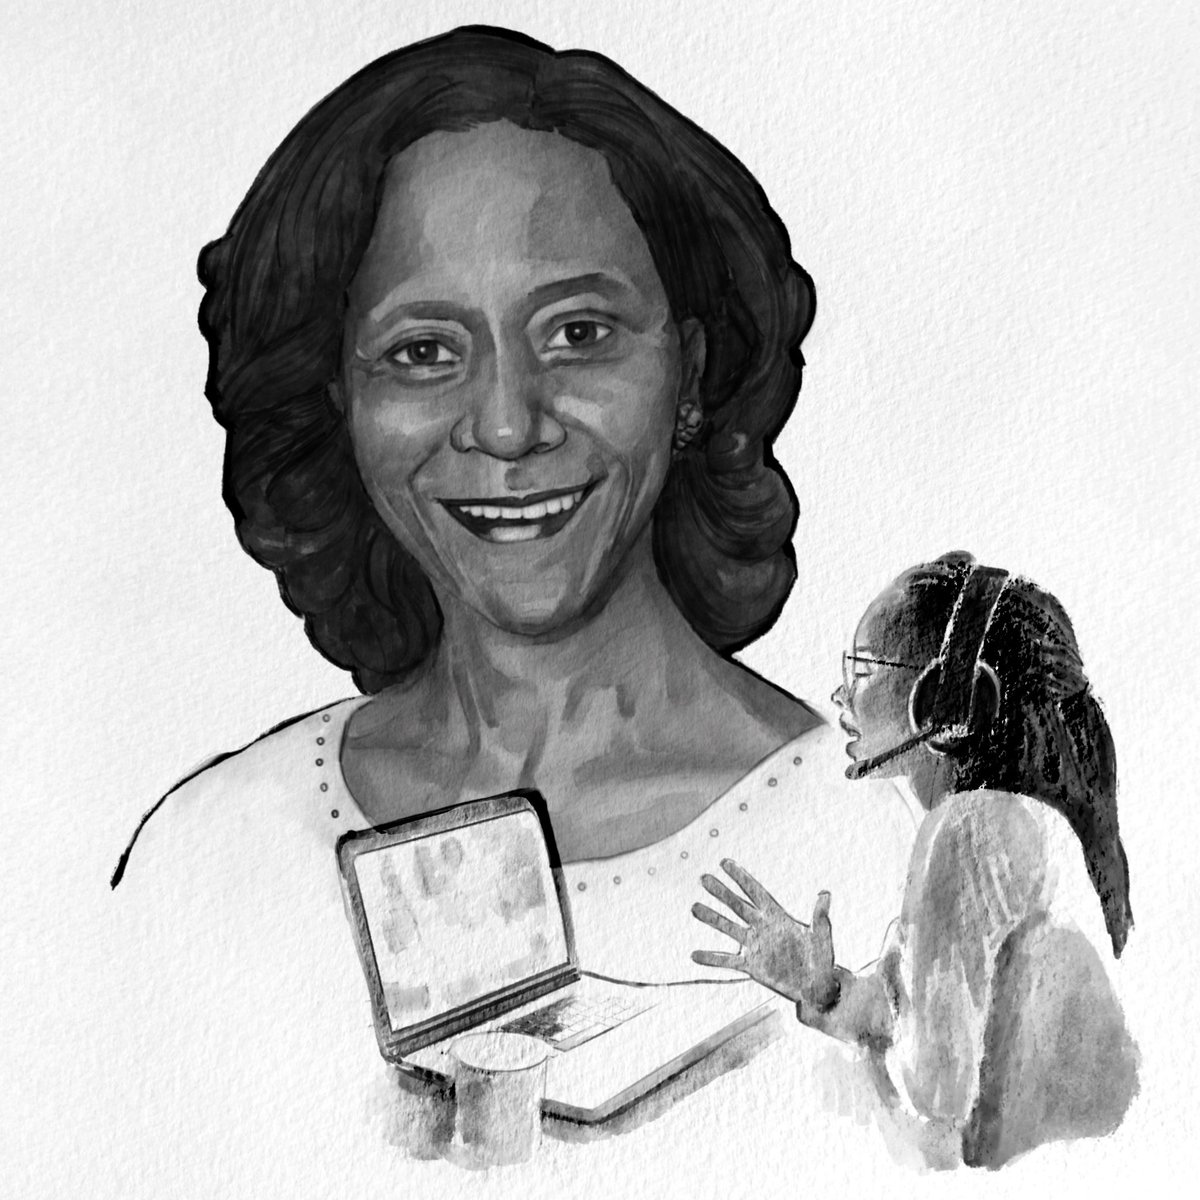 Marian Rogers Croak - Vice President of Engineering at Google. She holds more than 200 patents. Including a patent for VoIP (Voice over Internet Protocol) Technology allowing users to make calls over the internet instead of a phone line. xoxo, Tiff. 💋 #art #bhm  #blackinventors